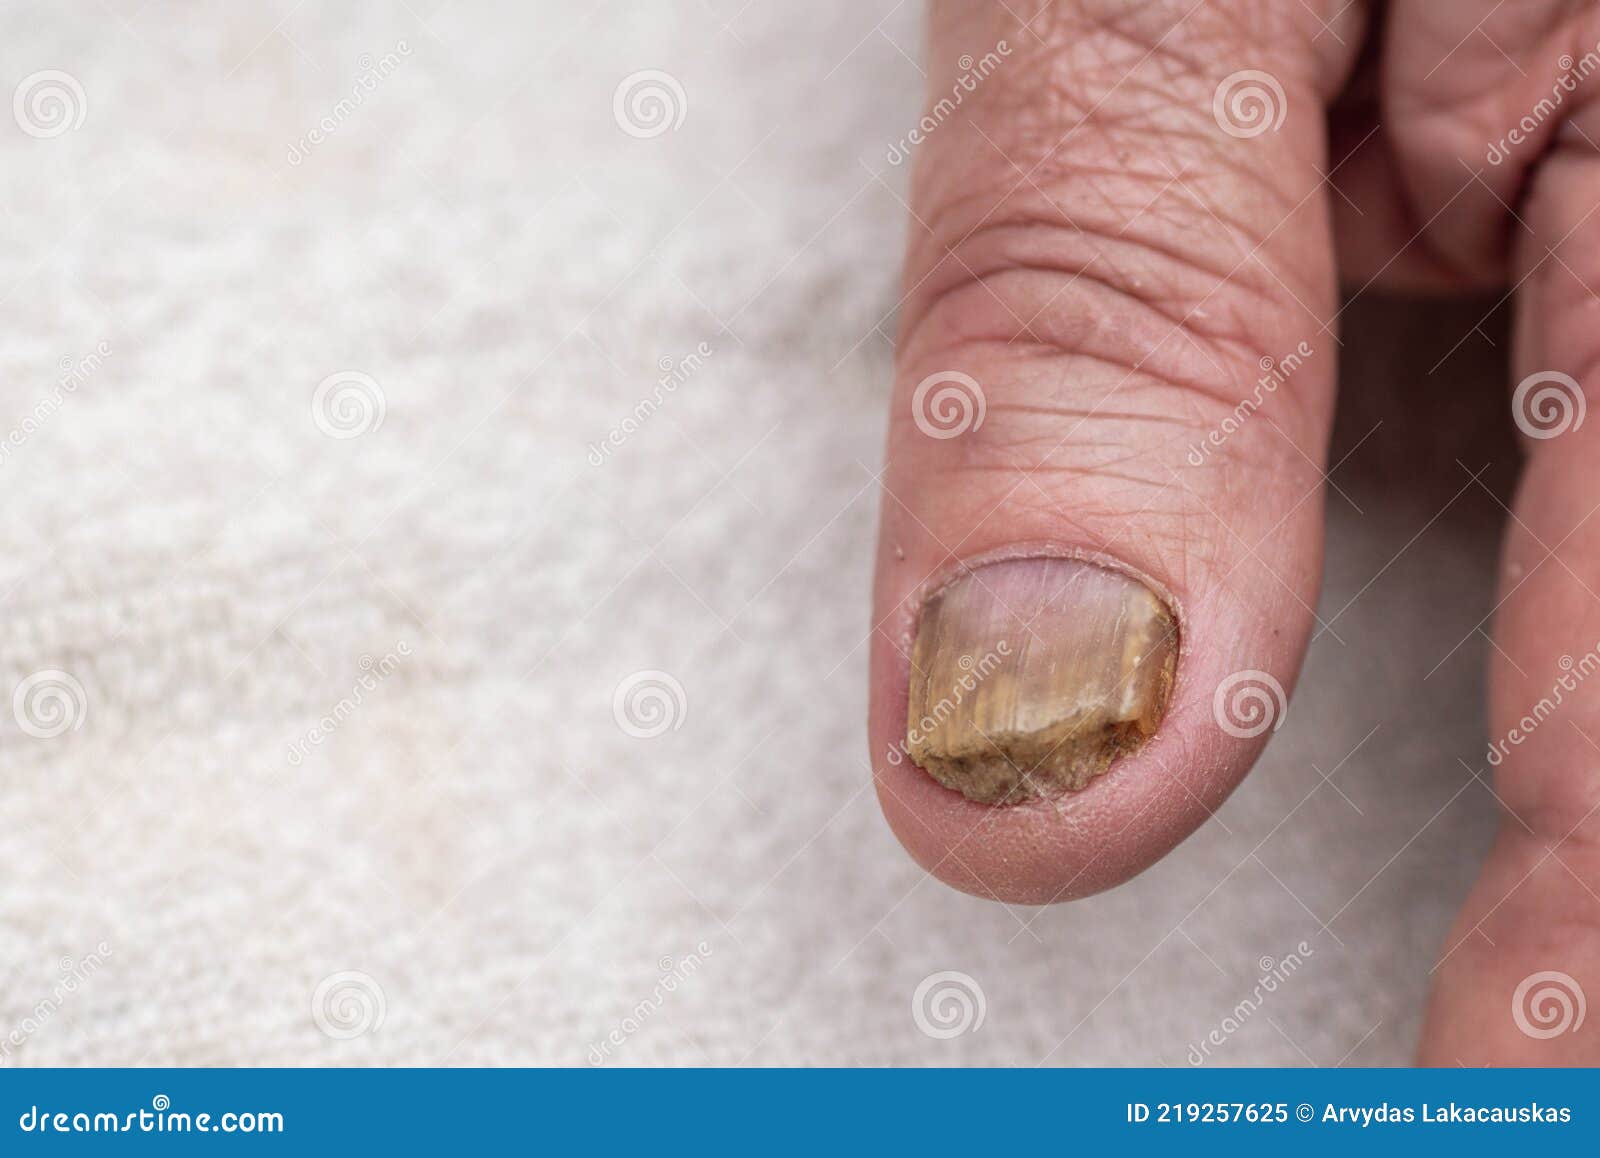 Fungus Infection on Nails Hand, Finger with onychomycosis, Fungal infection  on nails handisolated on white background. Stock Photo by  ©n.nonthamand.gmail.com 163262444